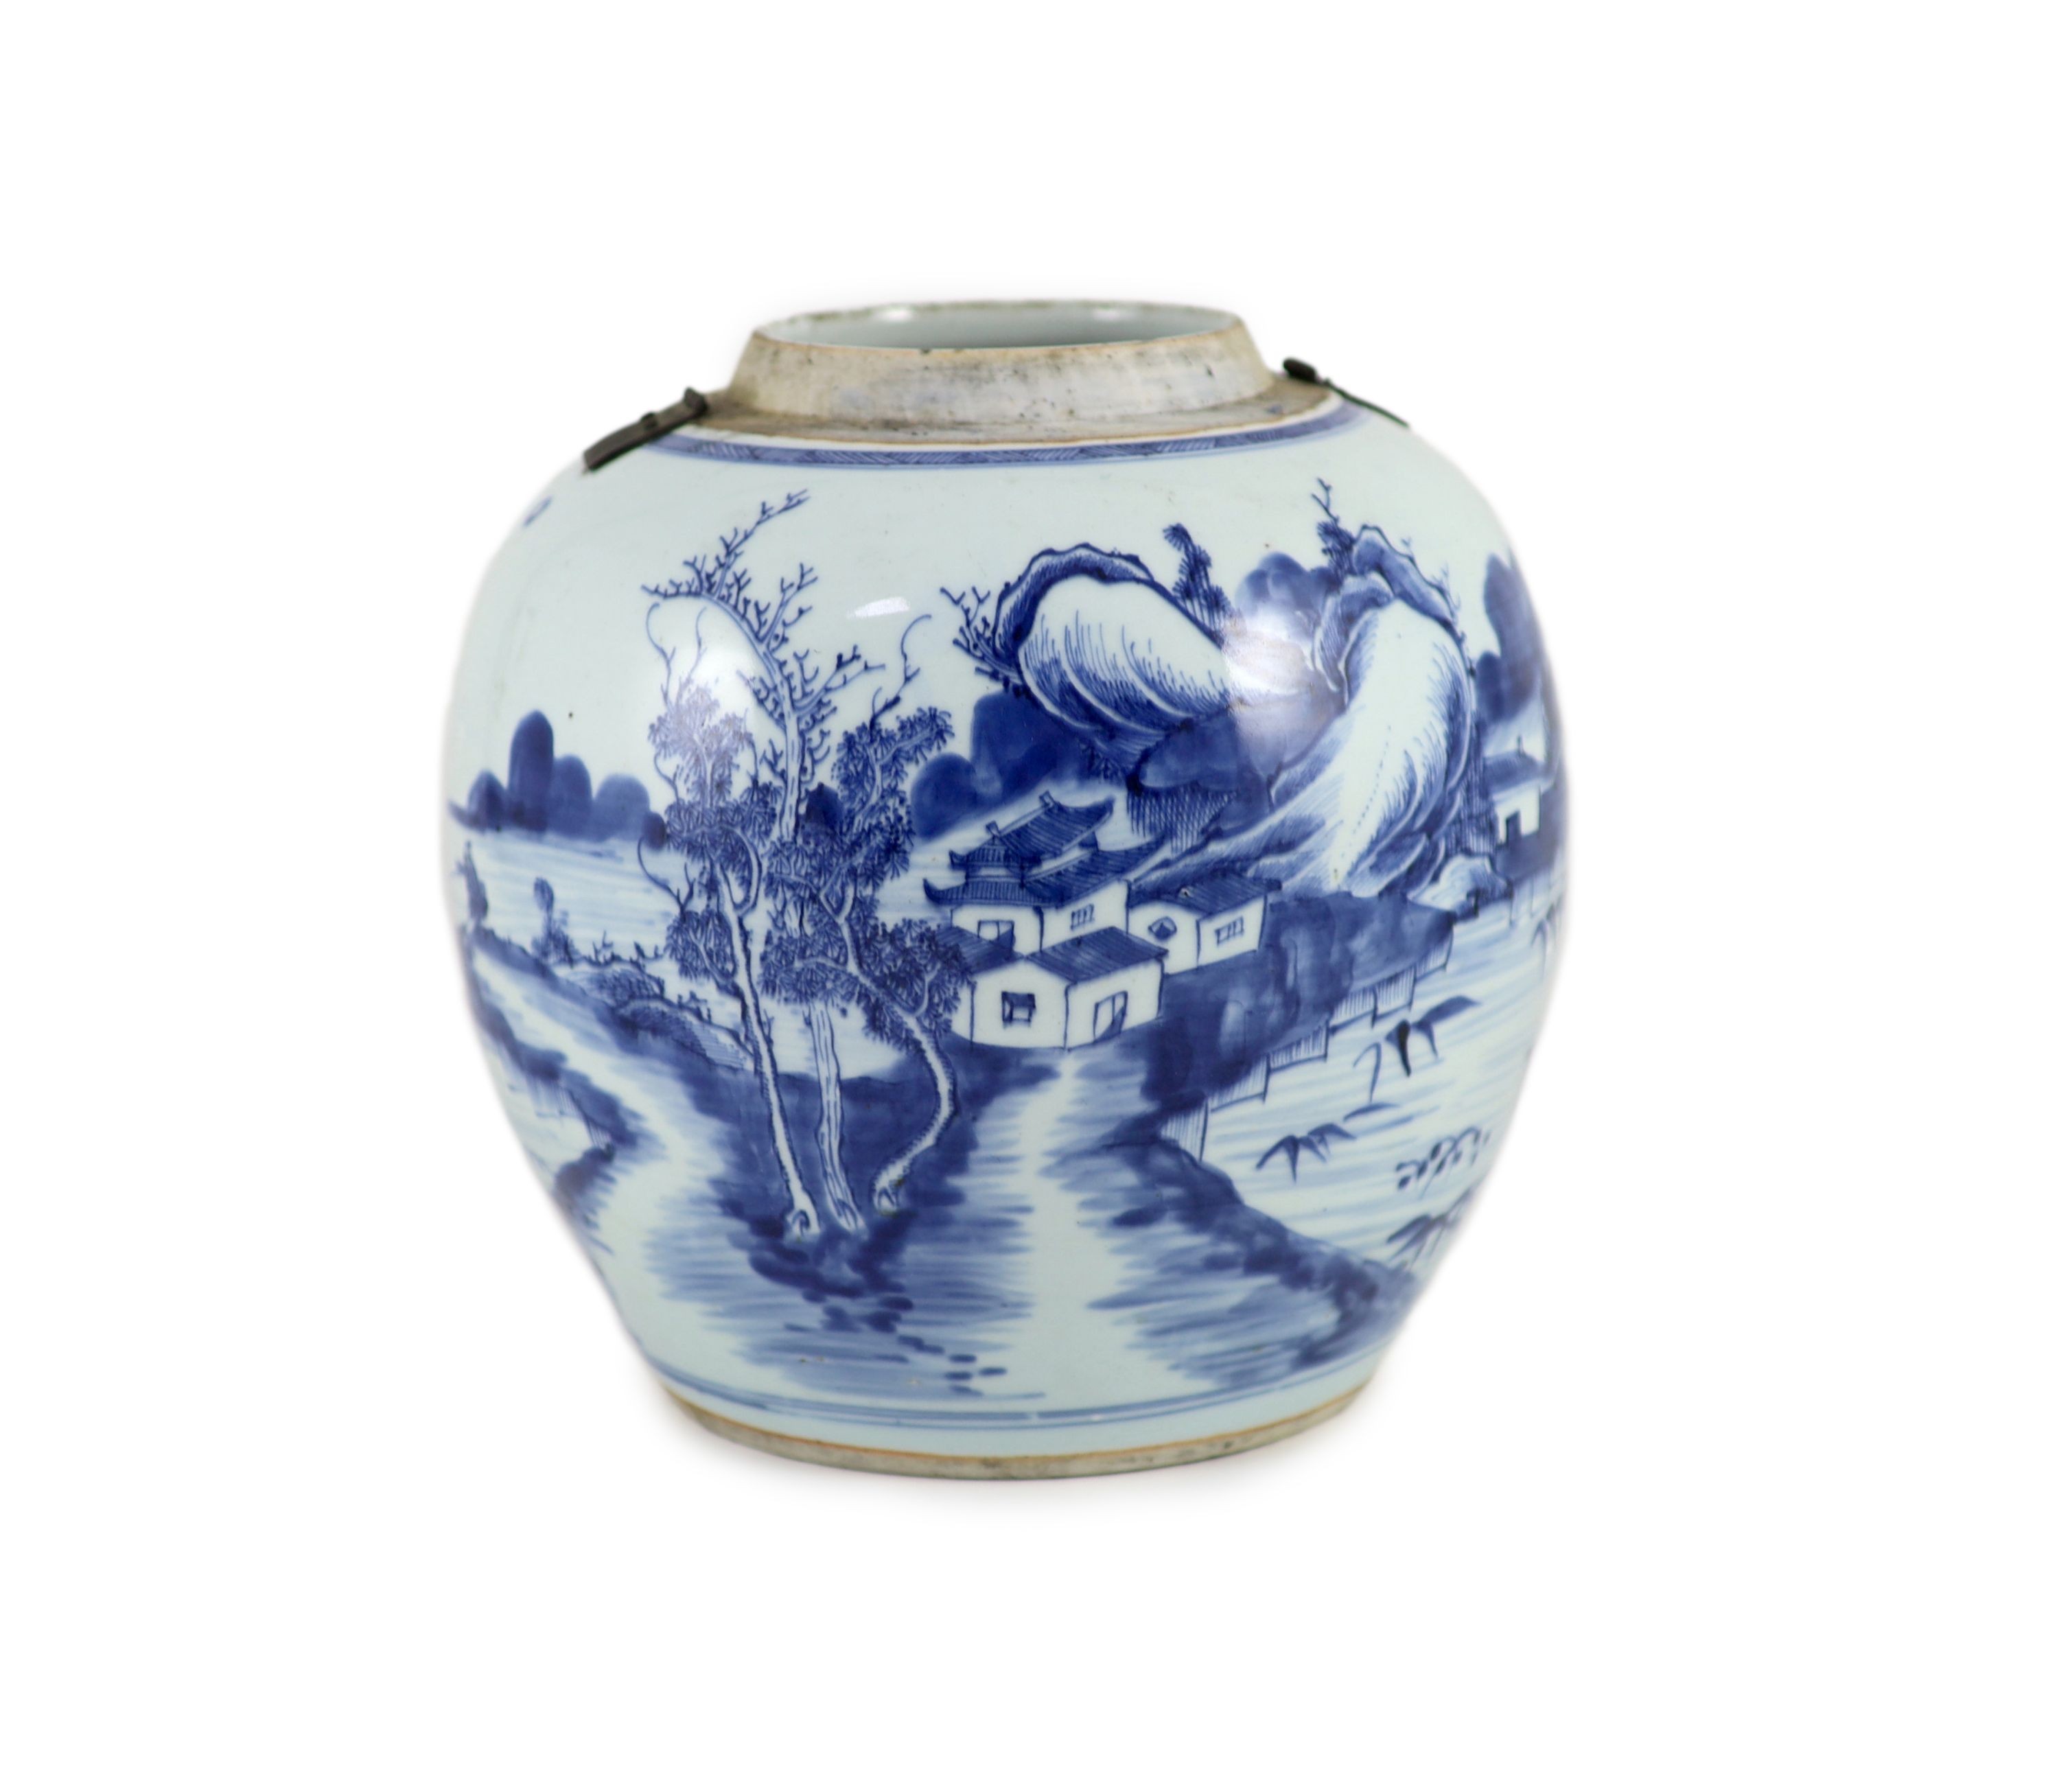 A Chinese blue and white jar and cover, Kangxi period (1662-1722),painted with a mountainous river